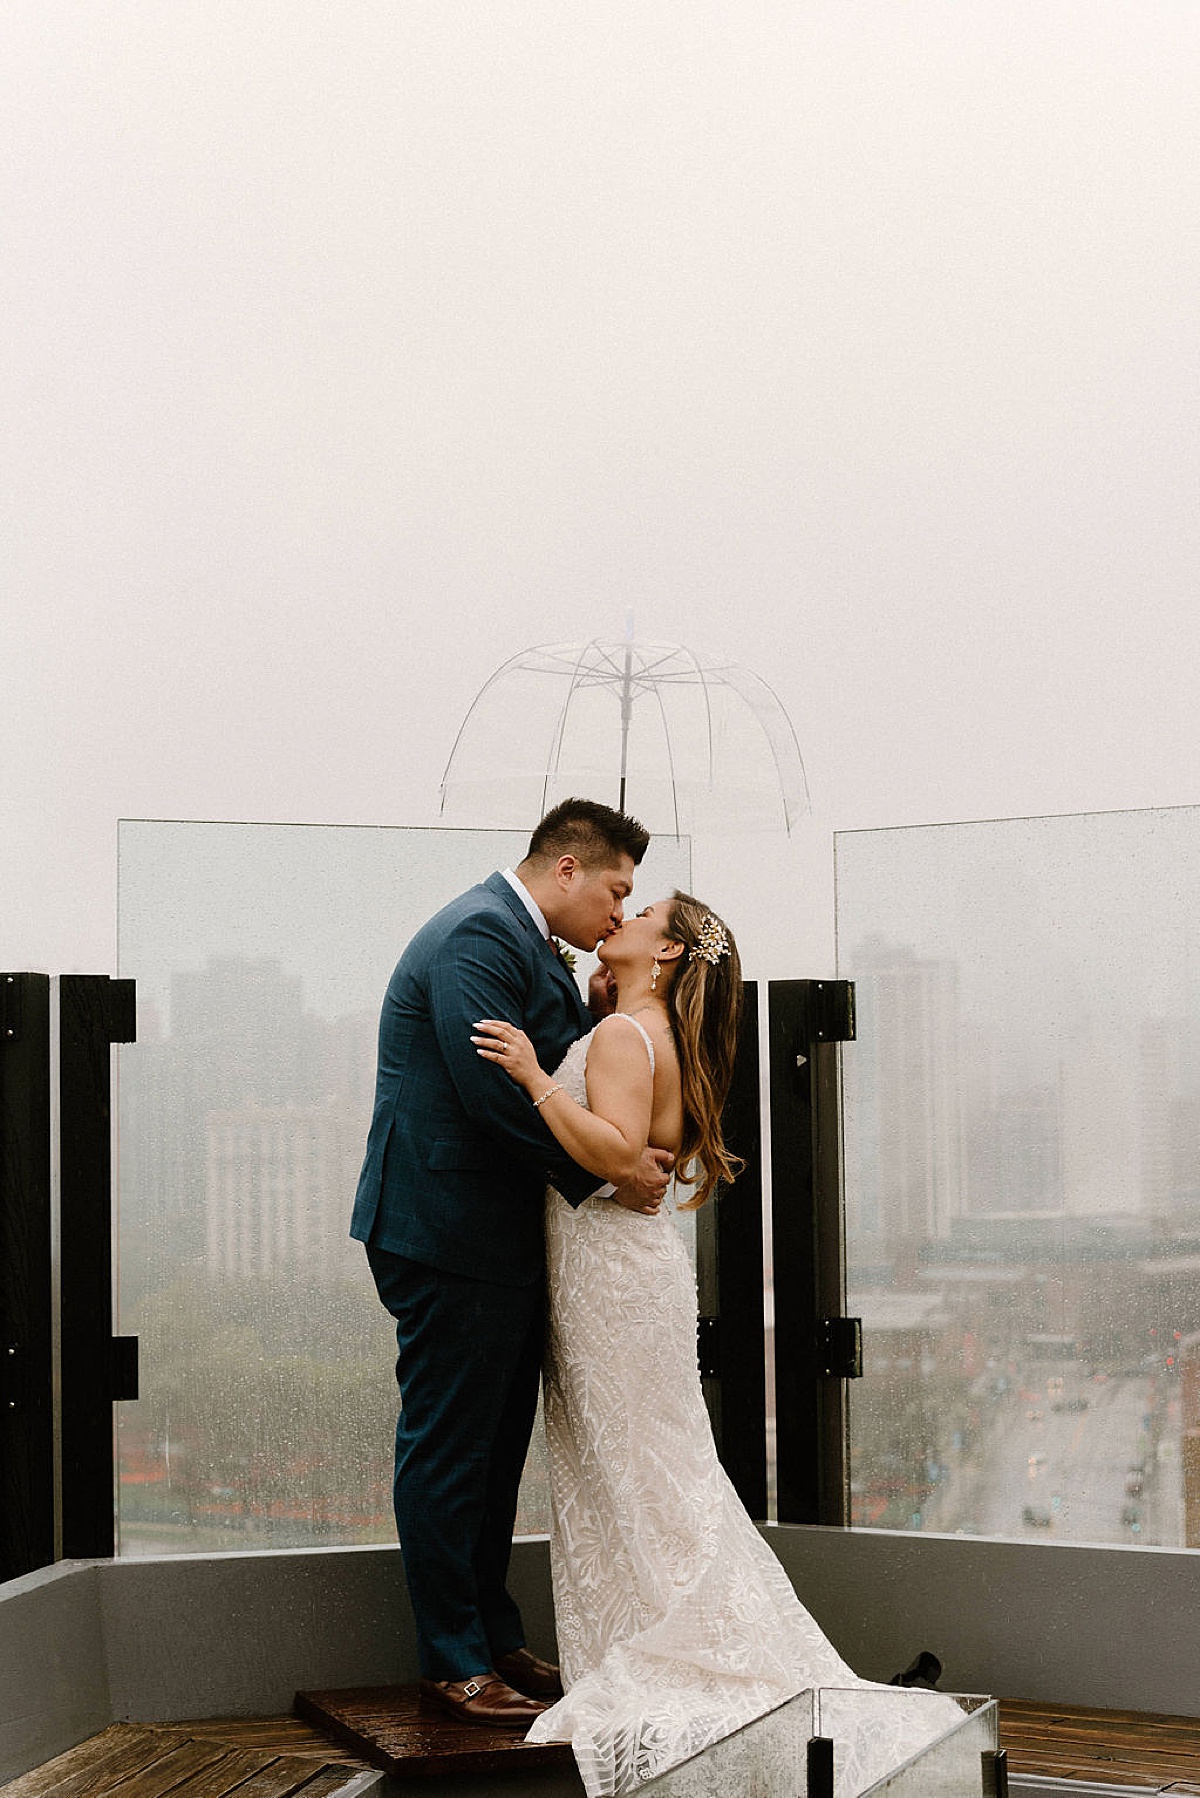 newlywed couple kiss on a rooftop in the rain during Ravenswood event center spring wedding